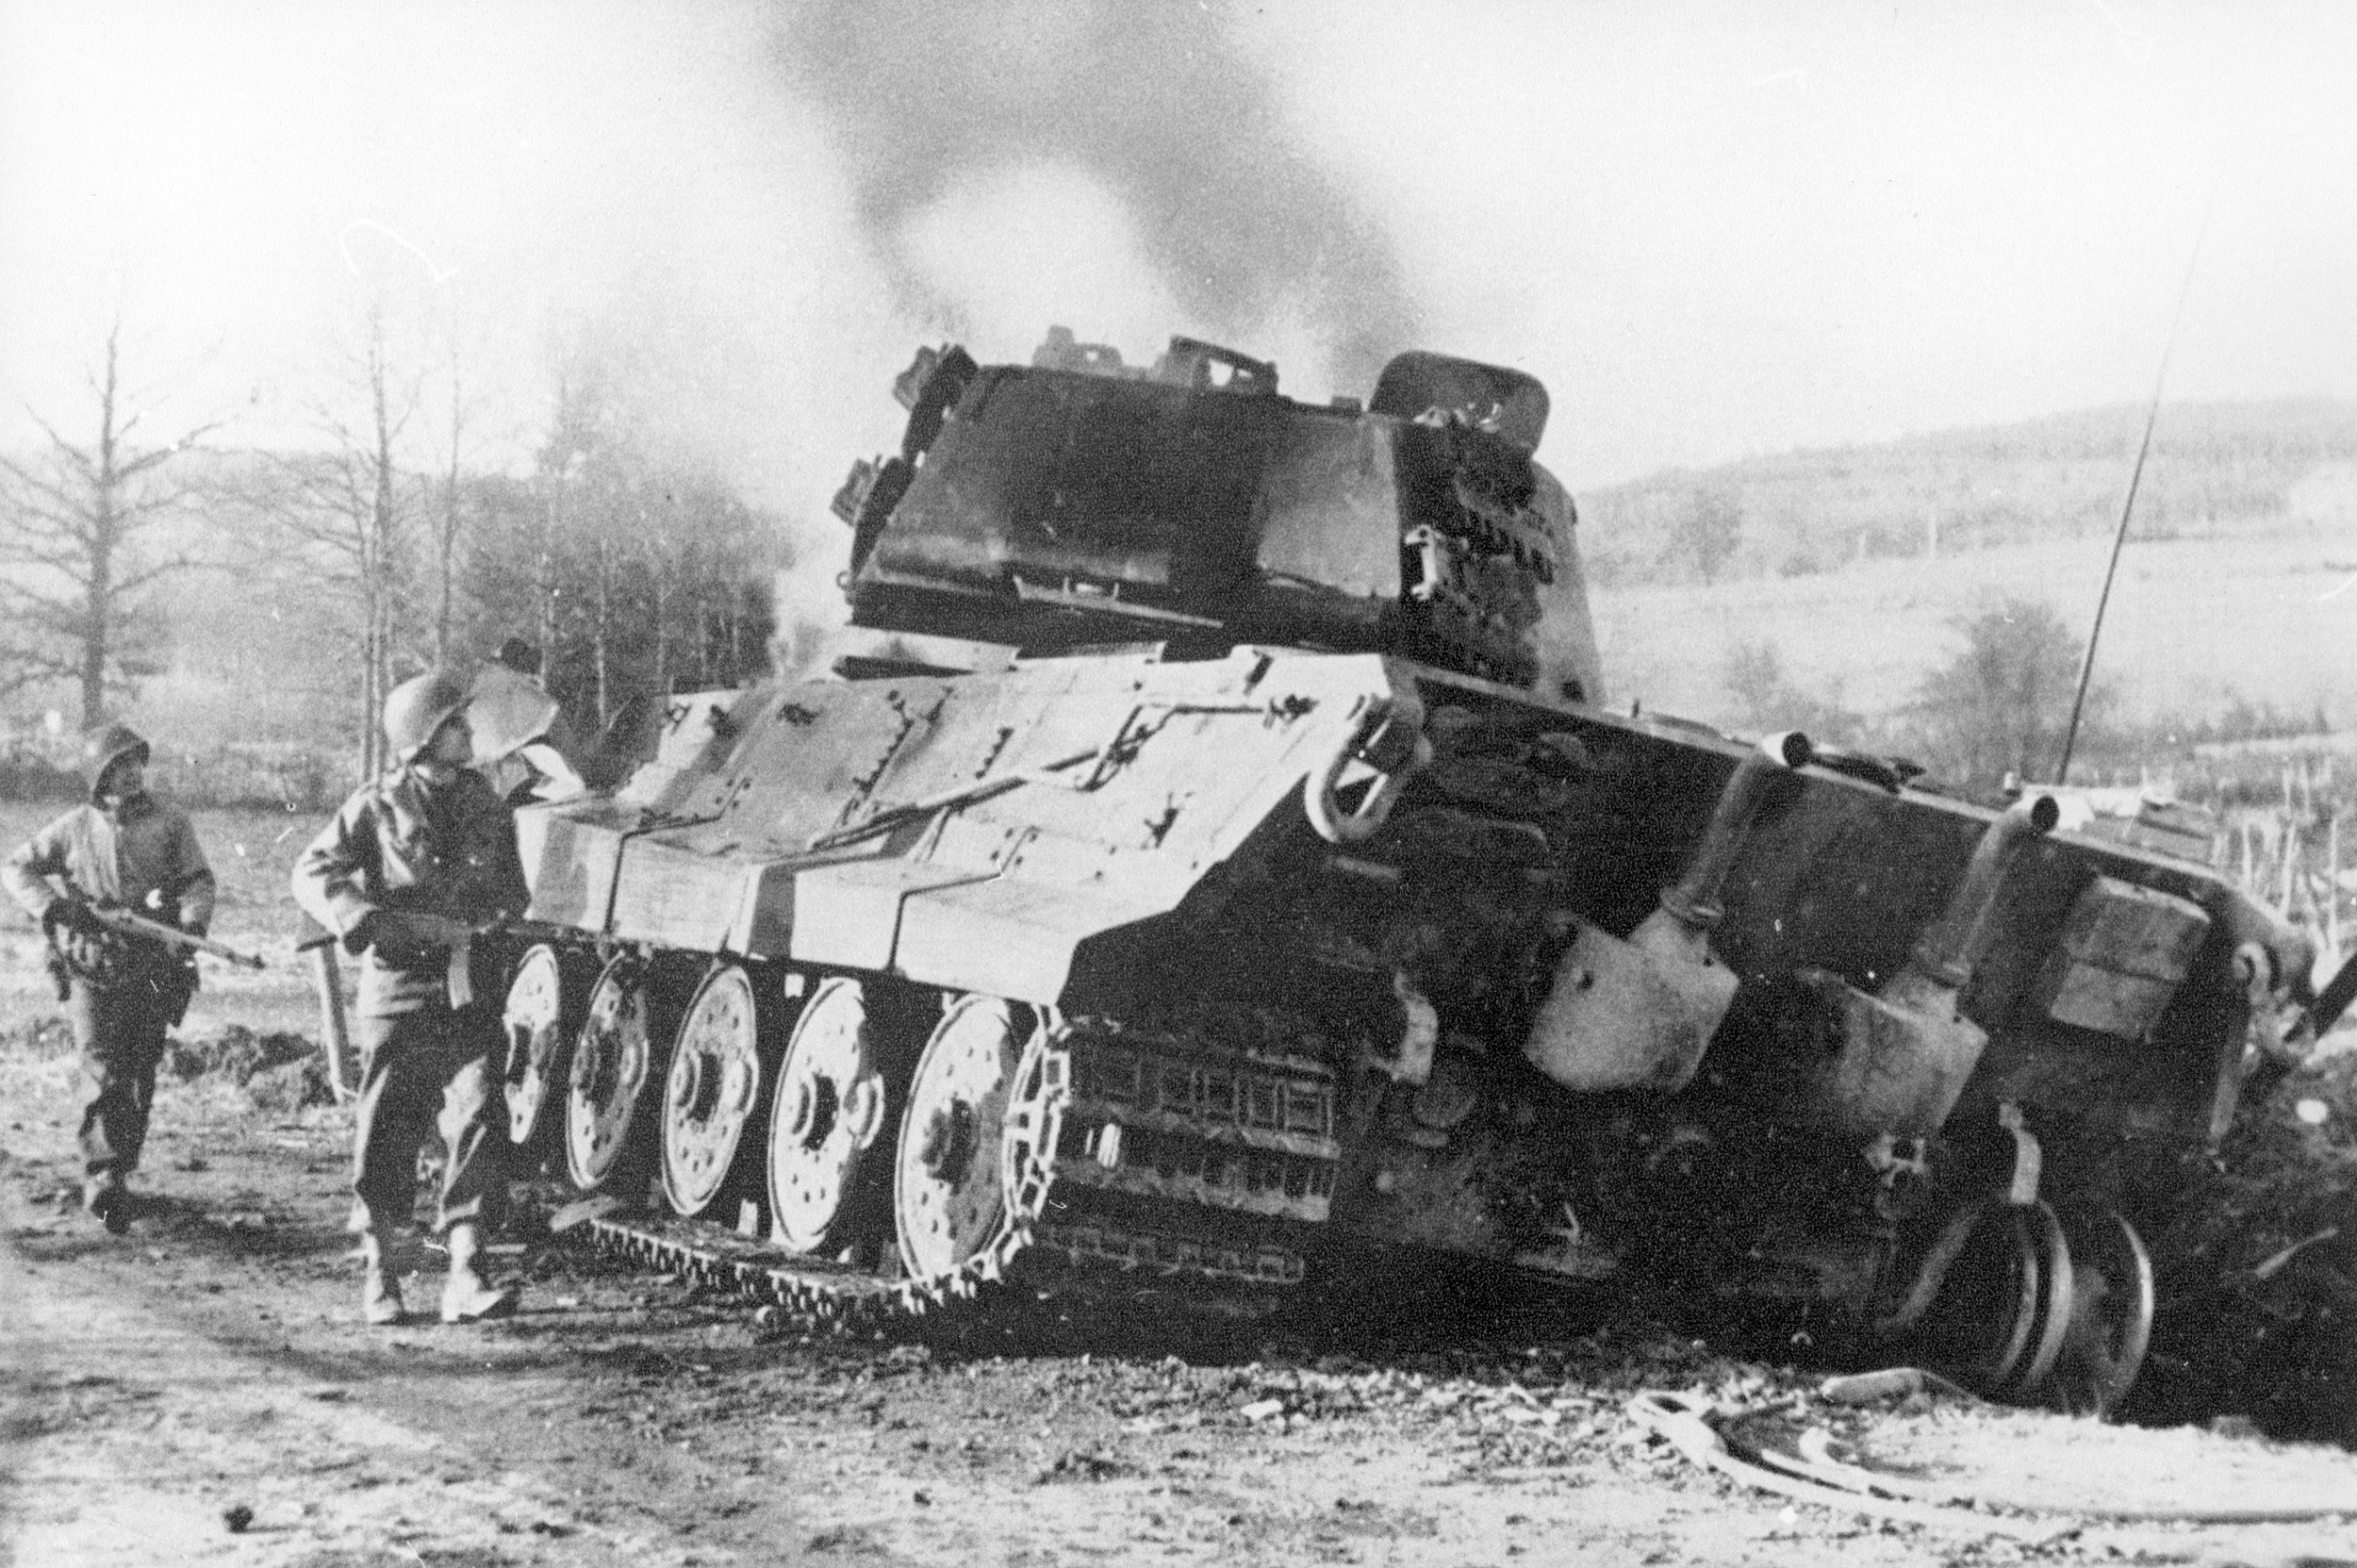 The hulk of a German Tiger tank, destroyed December 18, 1944, still smolders as a pair of American GIs ambles warily past, east of La Gleize. 